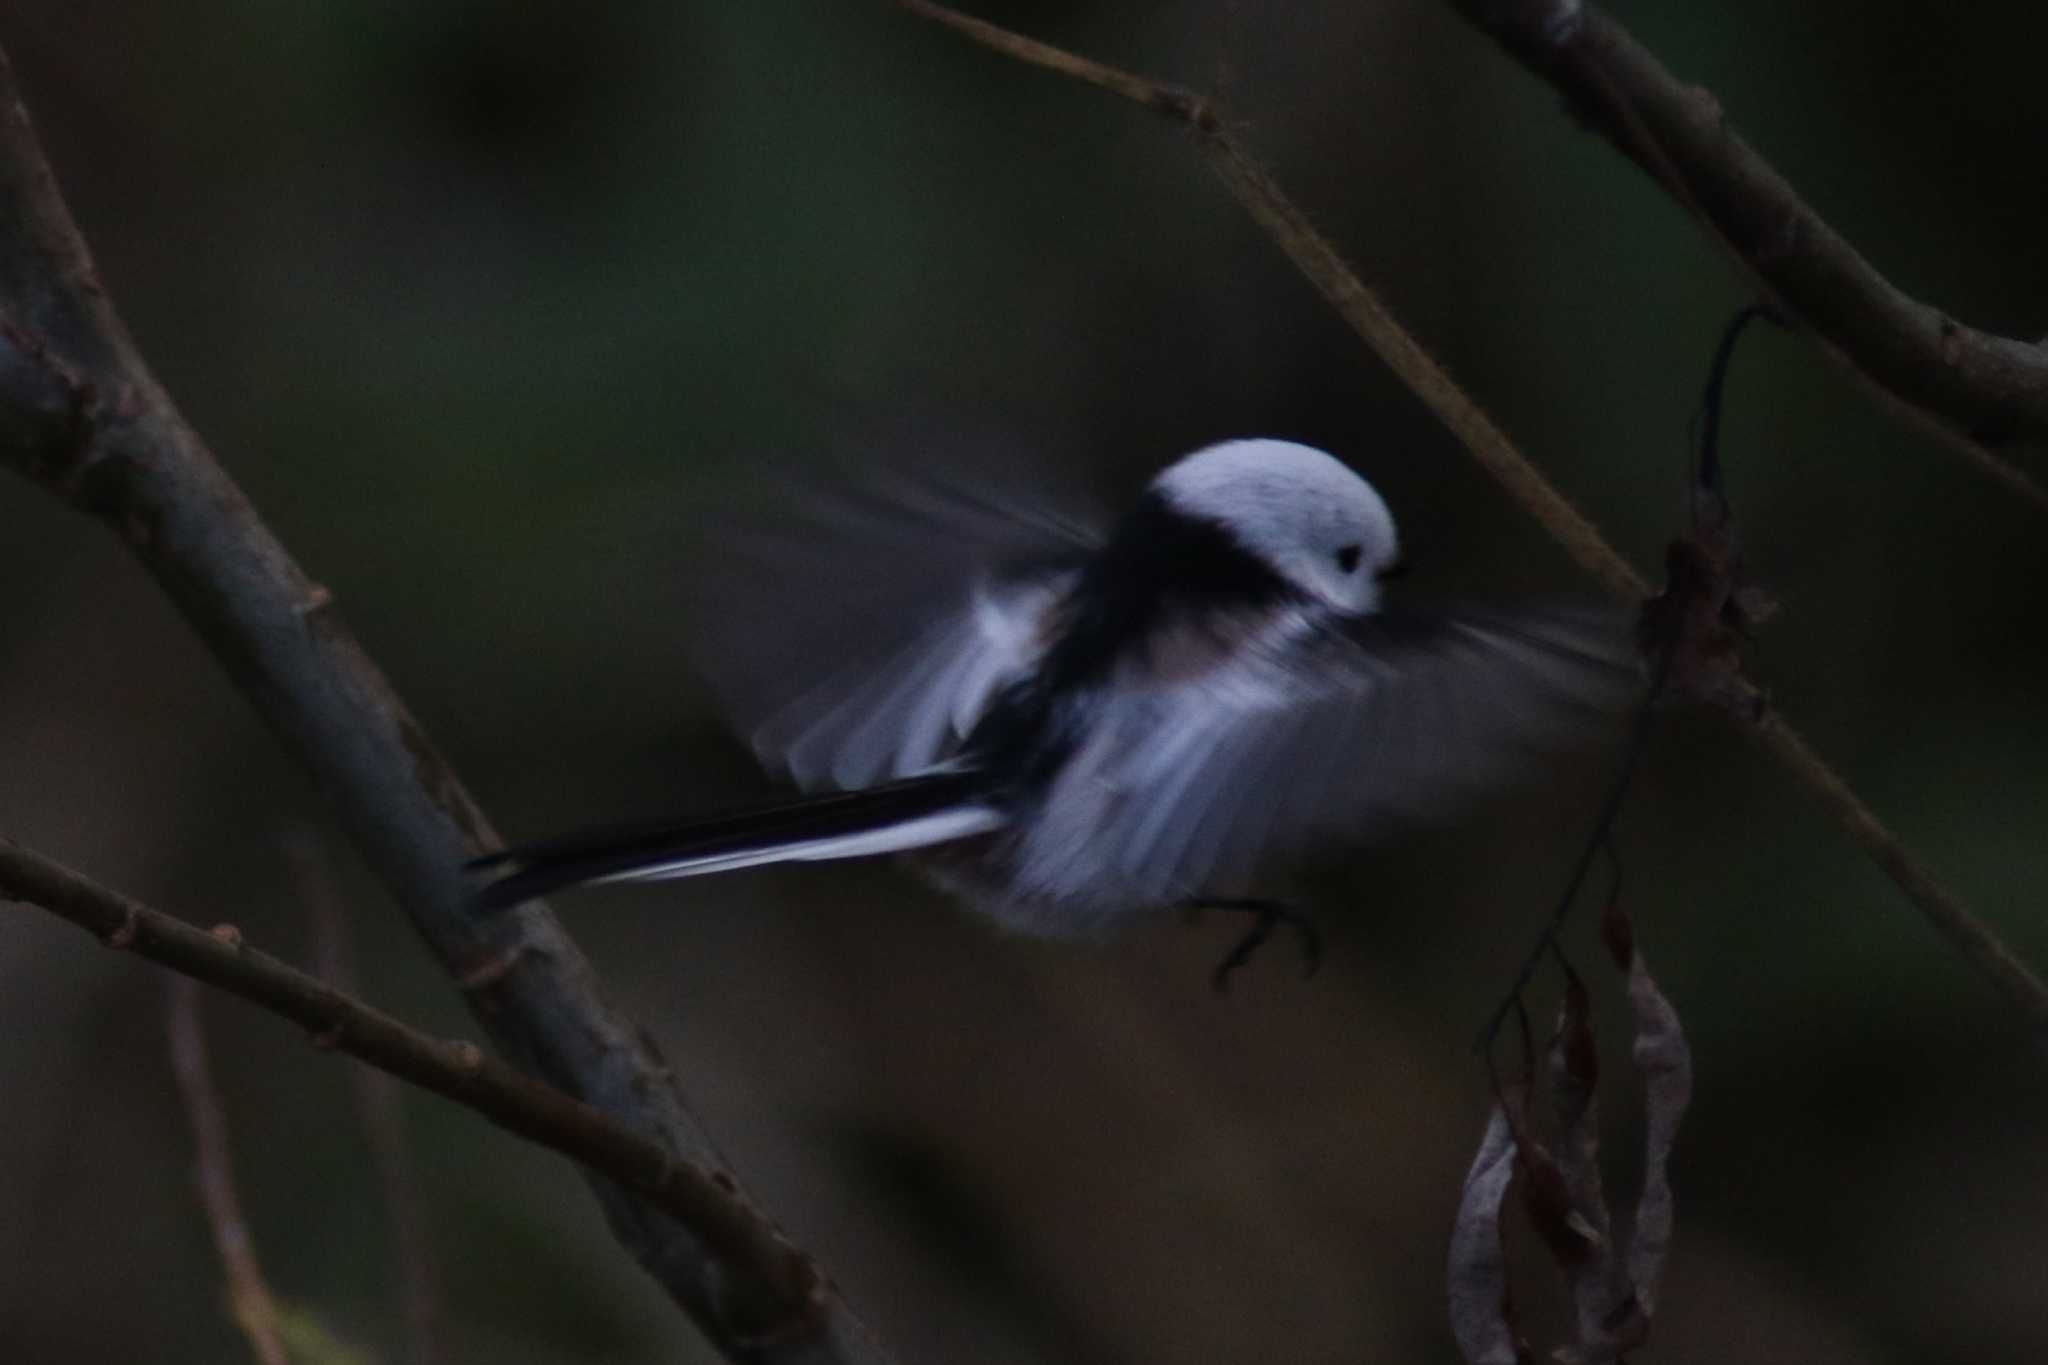 Photo of Long-tailed tit(japonicus) at Makomanai Park by 日野いすゞ